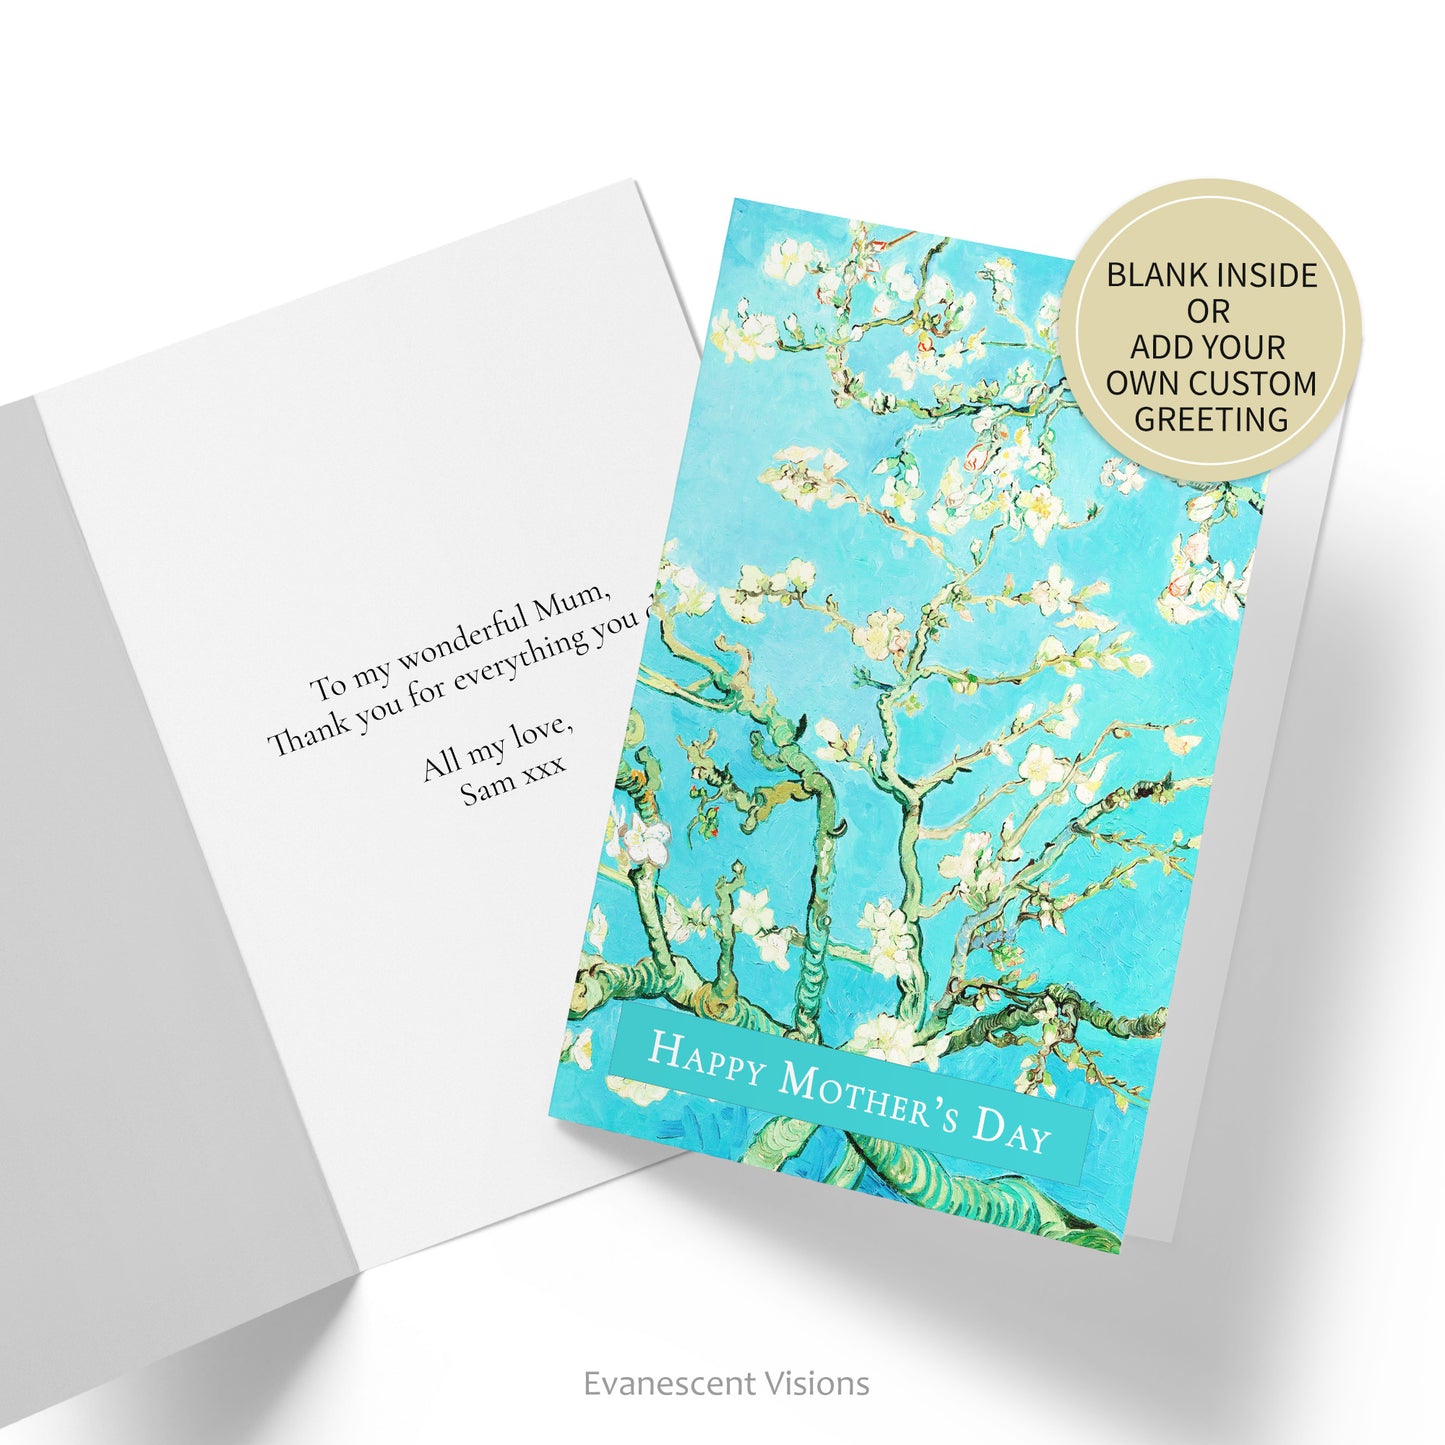 Card with image from Van Gogh's 'Almond Blossom' with a banner at the bottom with the words 'Happy Mother's Day.' Inside of card shown with custom greeting.